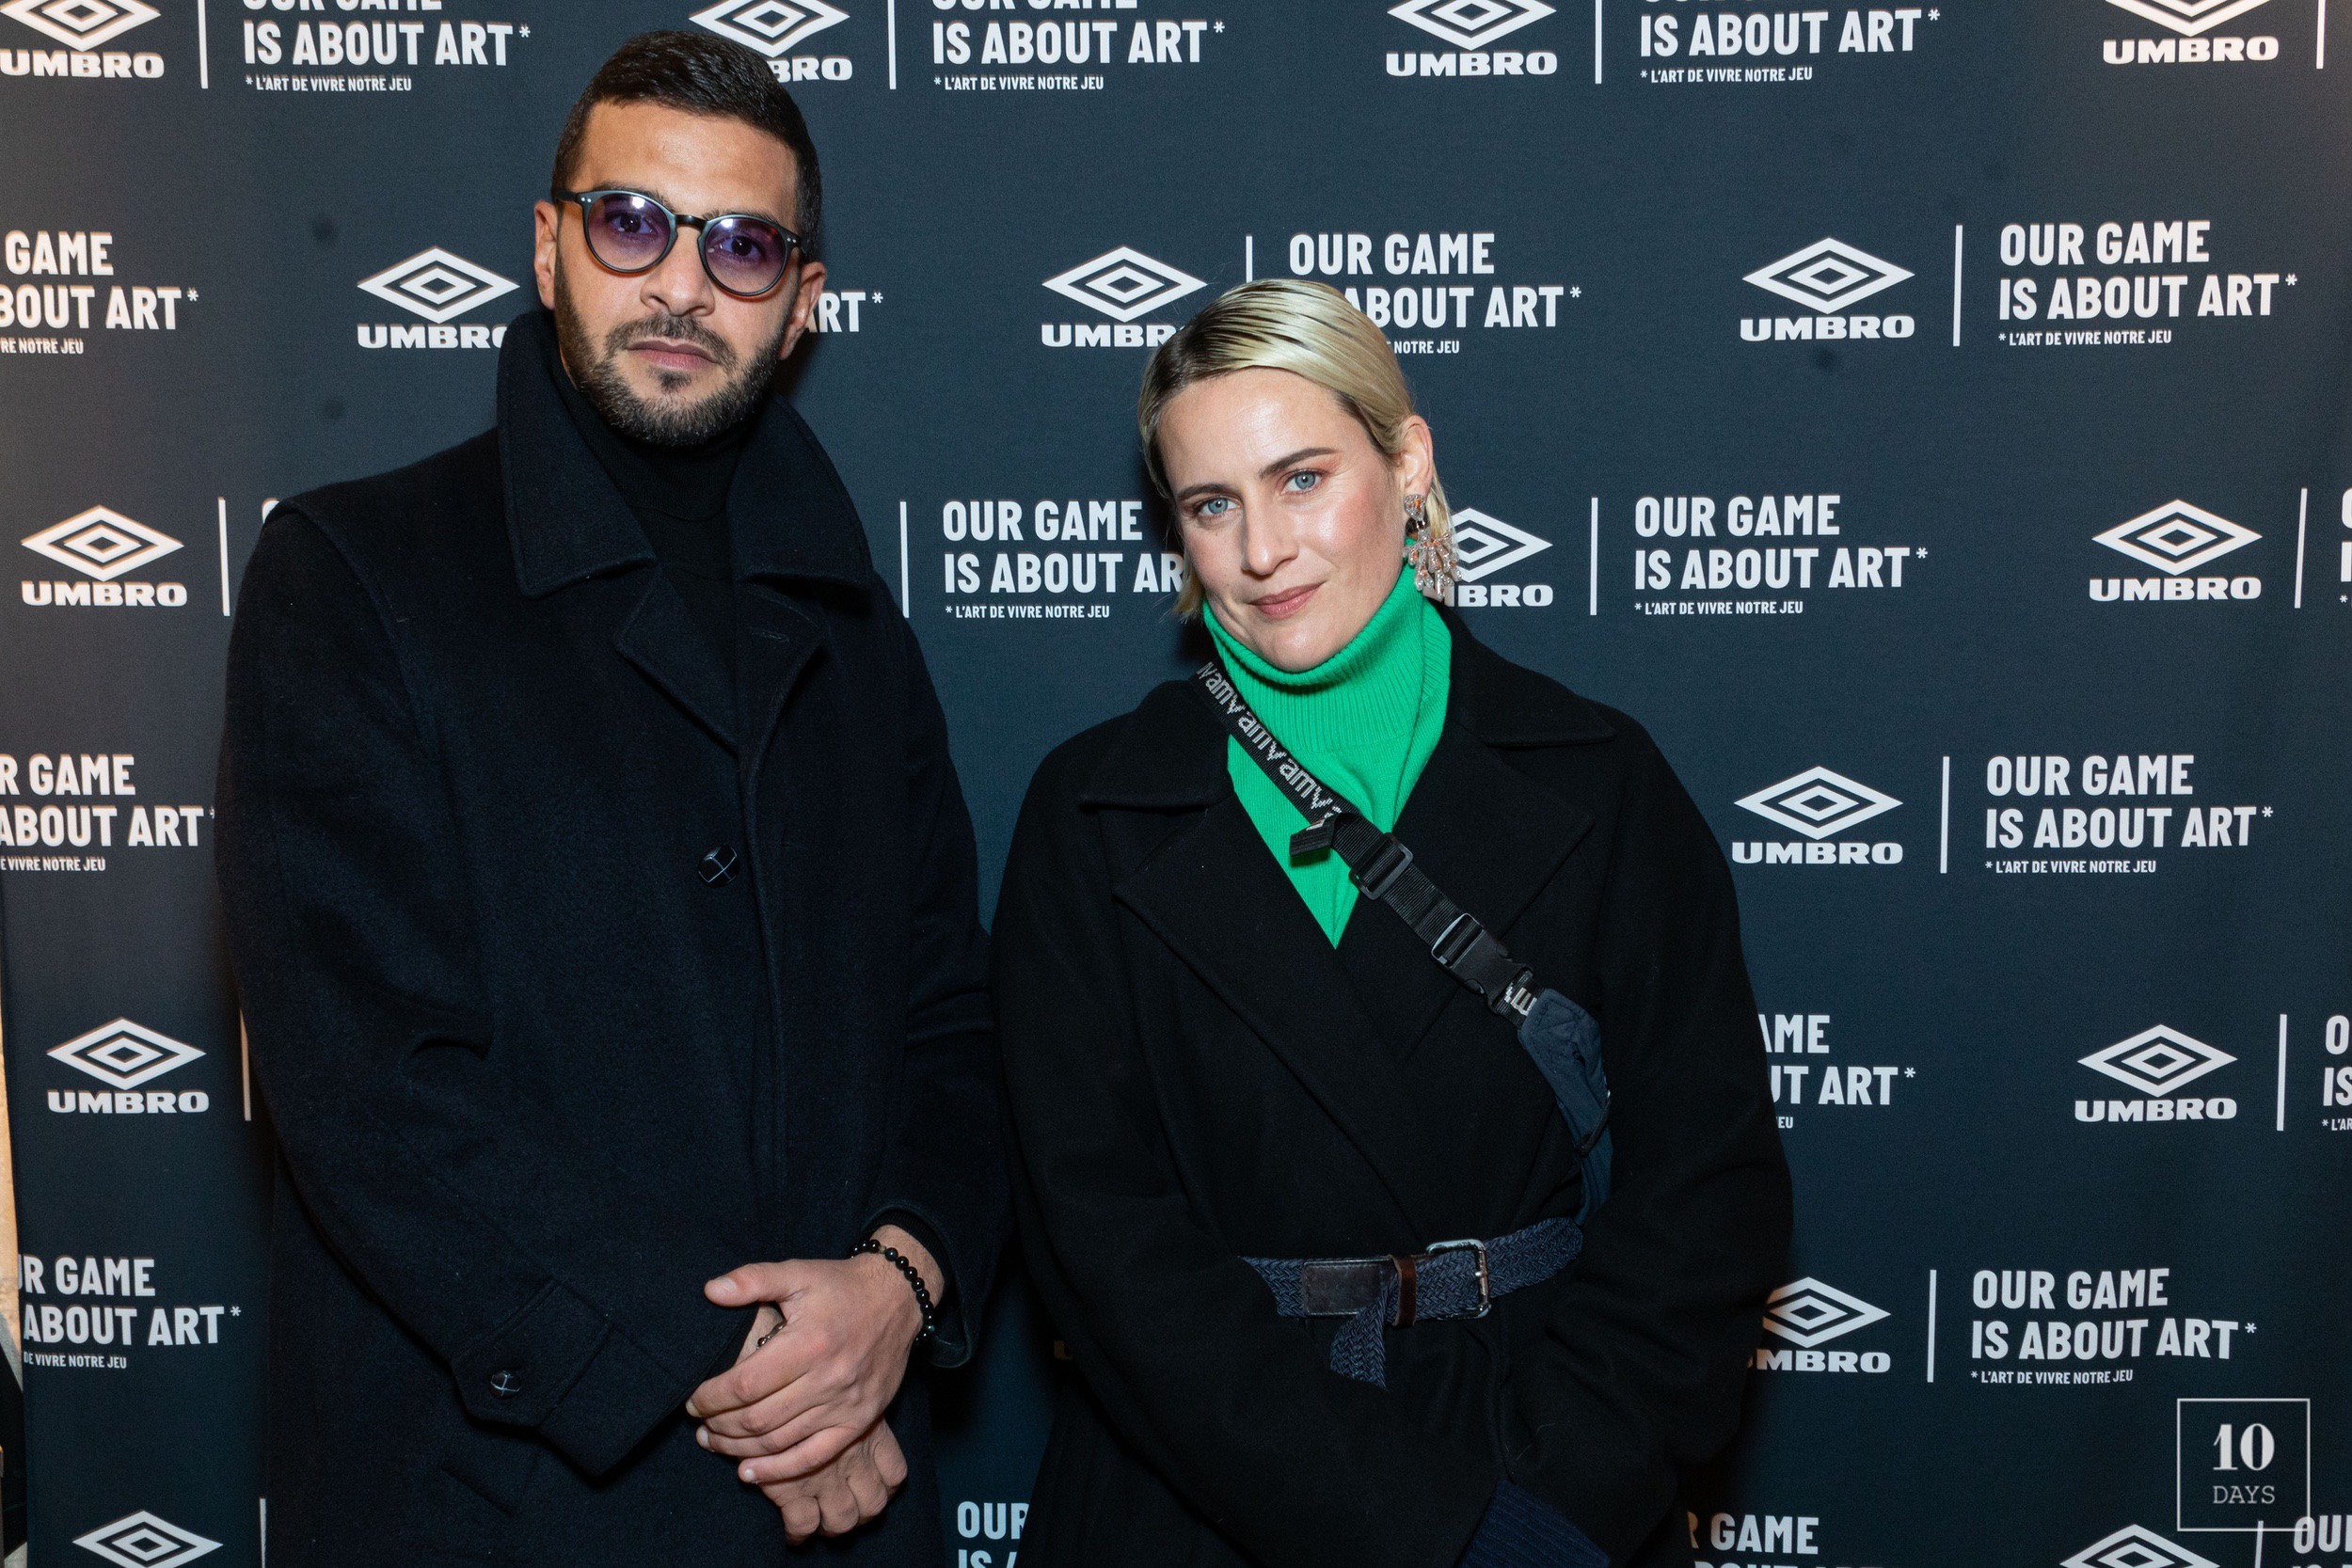 Umbro France presents “Our Game is About Art” with Jaouad Bentama